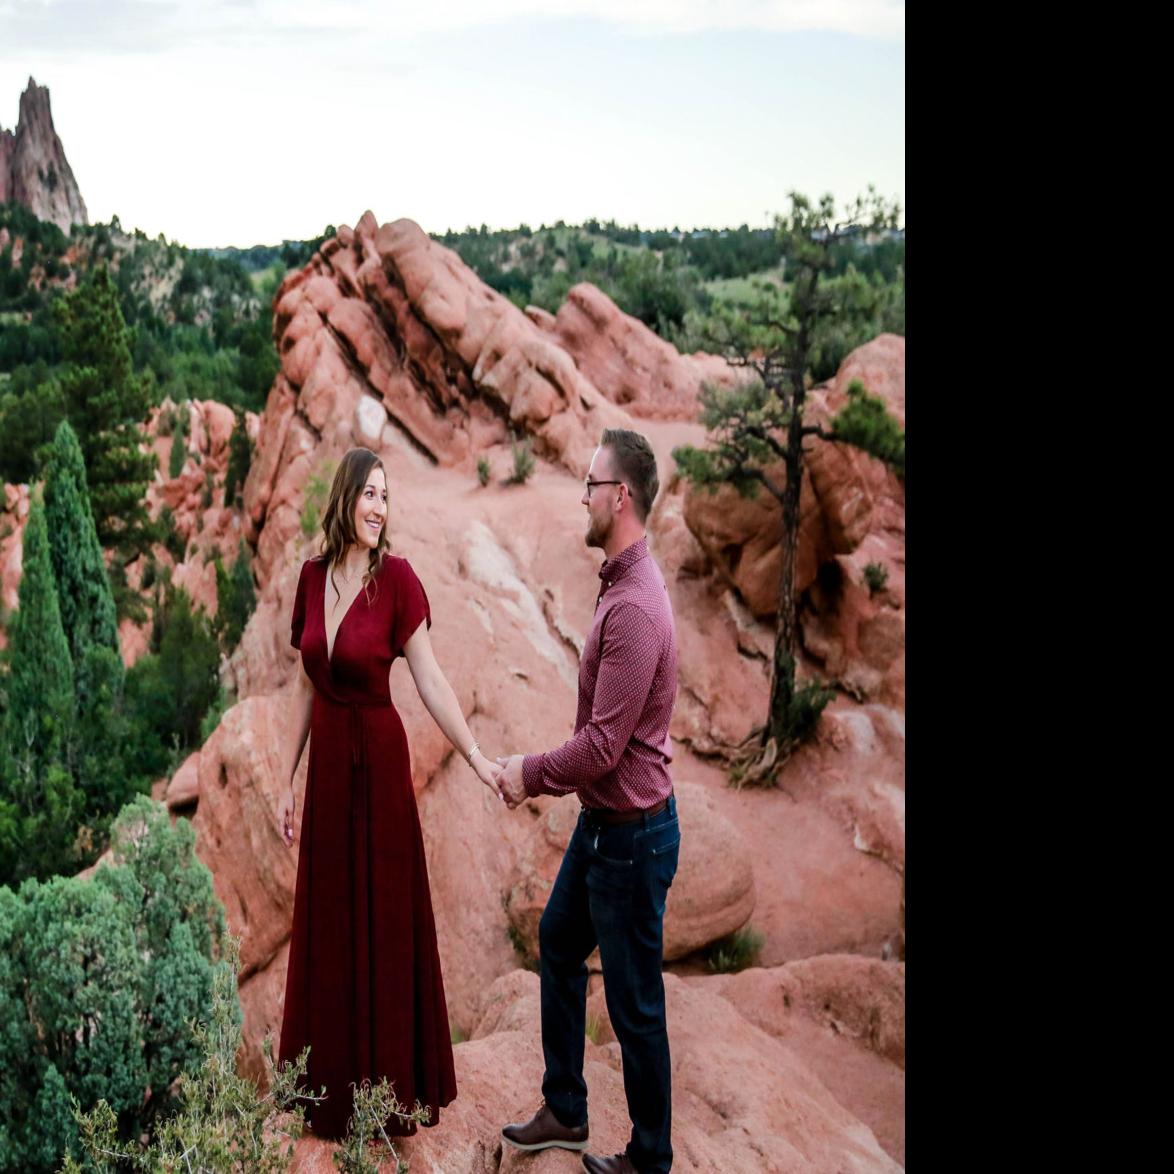 Possible Garden Of The Gods Photo Fee Sparks Anger Confusion